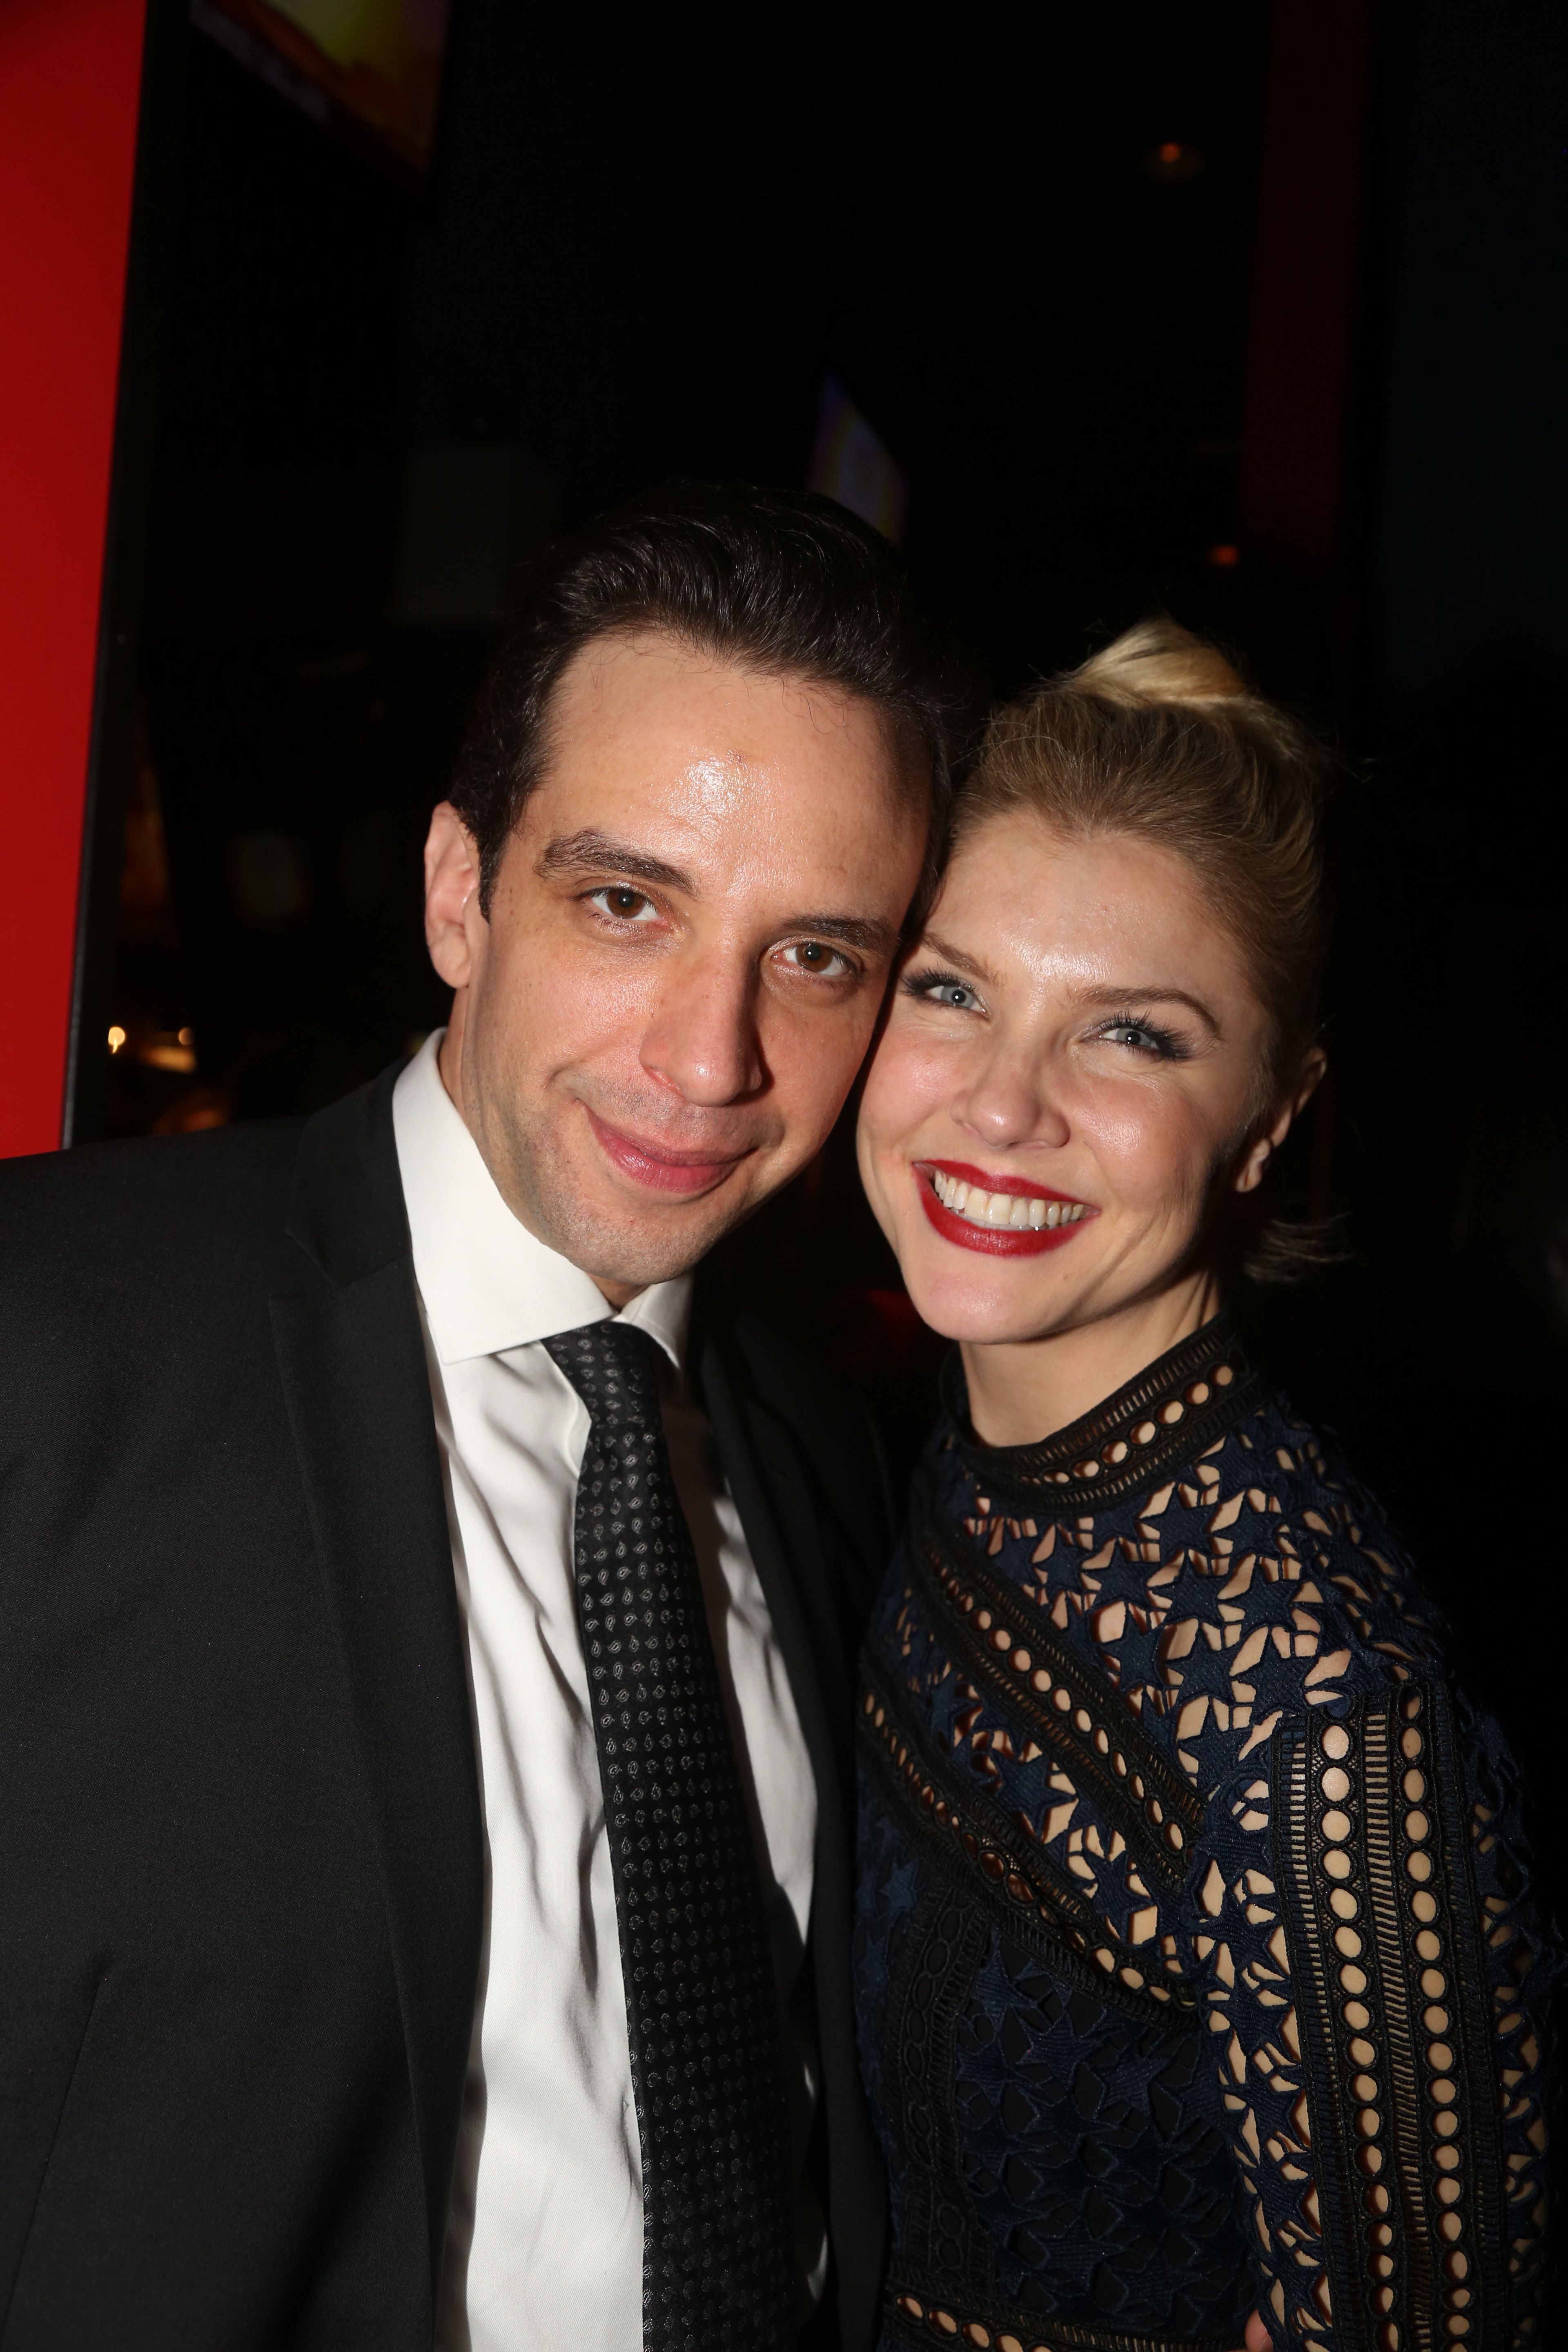 Nick Cordero and Amanda Kloots at the after party for Manhattan Concert Production's Broadway series "Crazy For You" One Night Only Production at Planet Hollywood Times Square in New York City | Photo: Bruce Glikas/FilmMagic via Getty Images